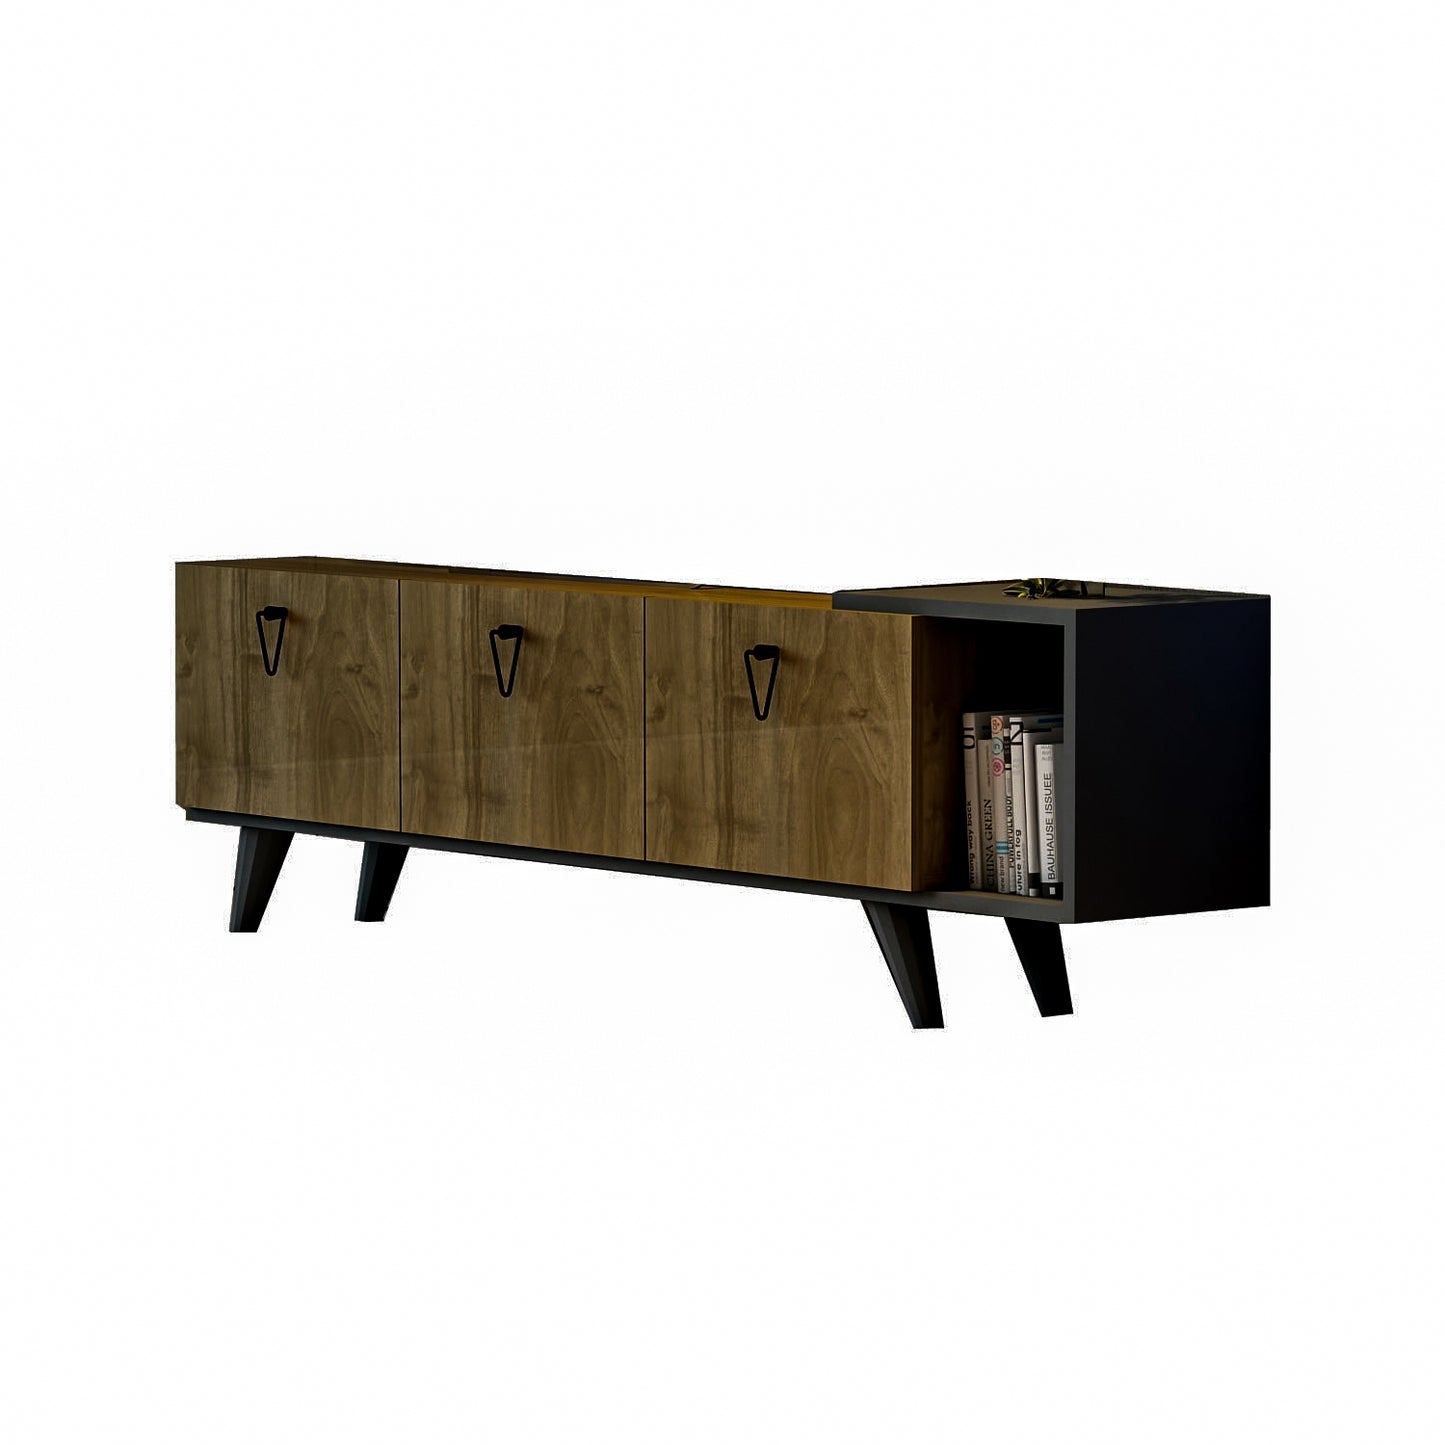 Agnus TV stand with Cabinets and Shelf